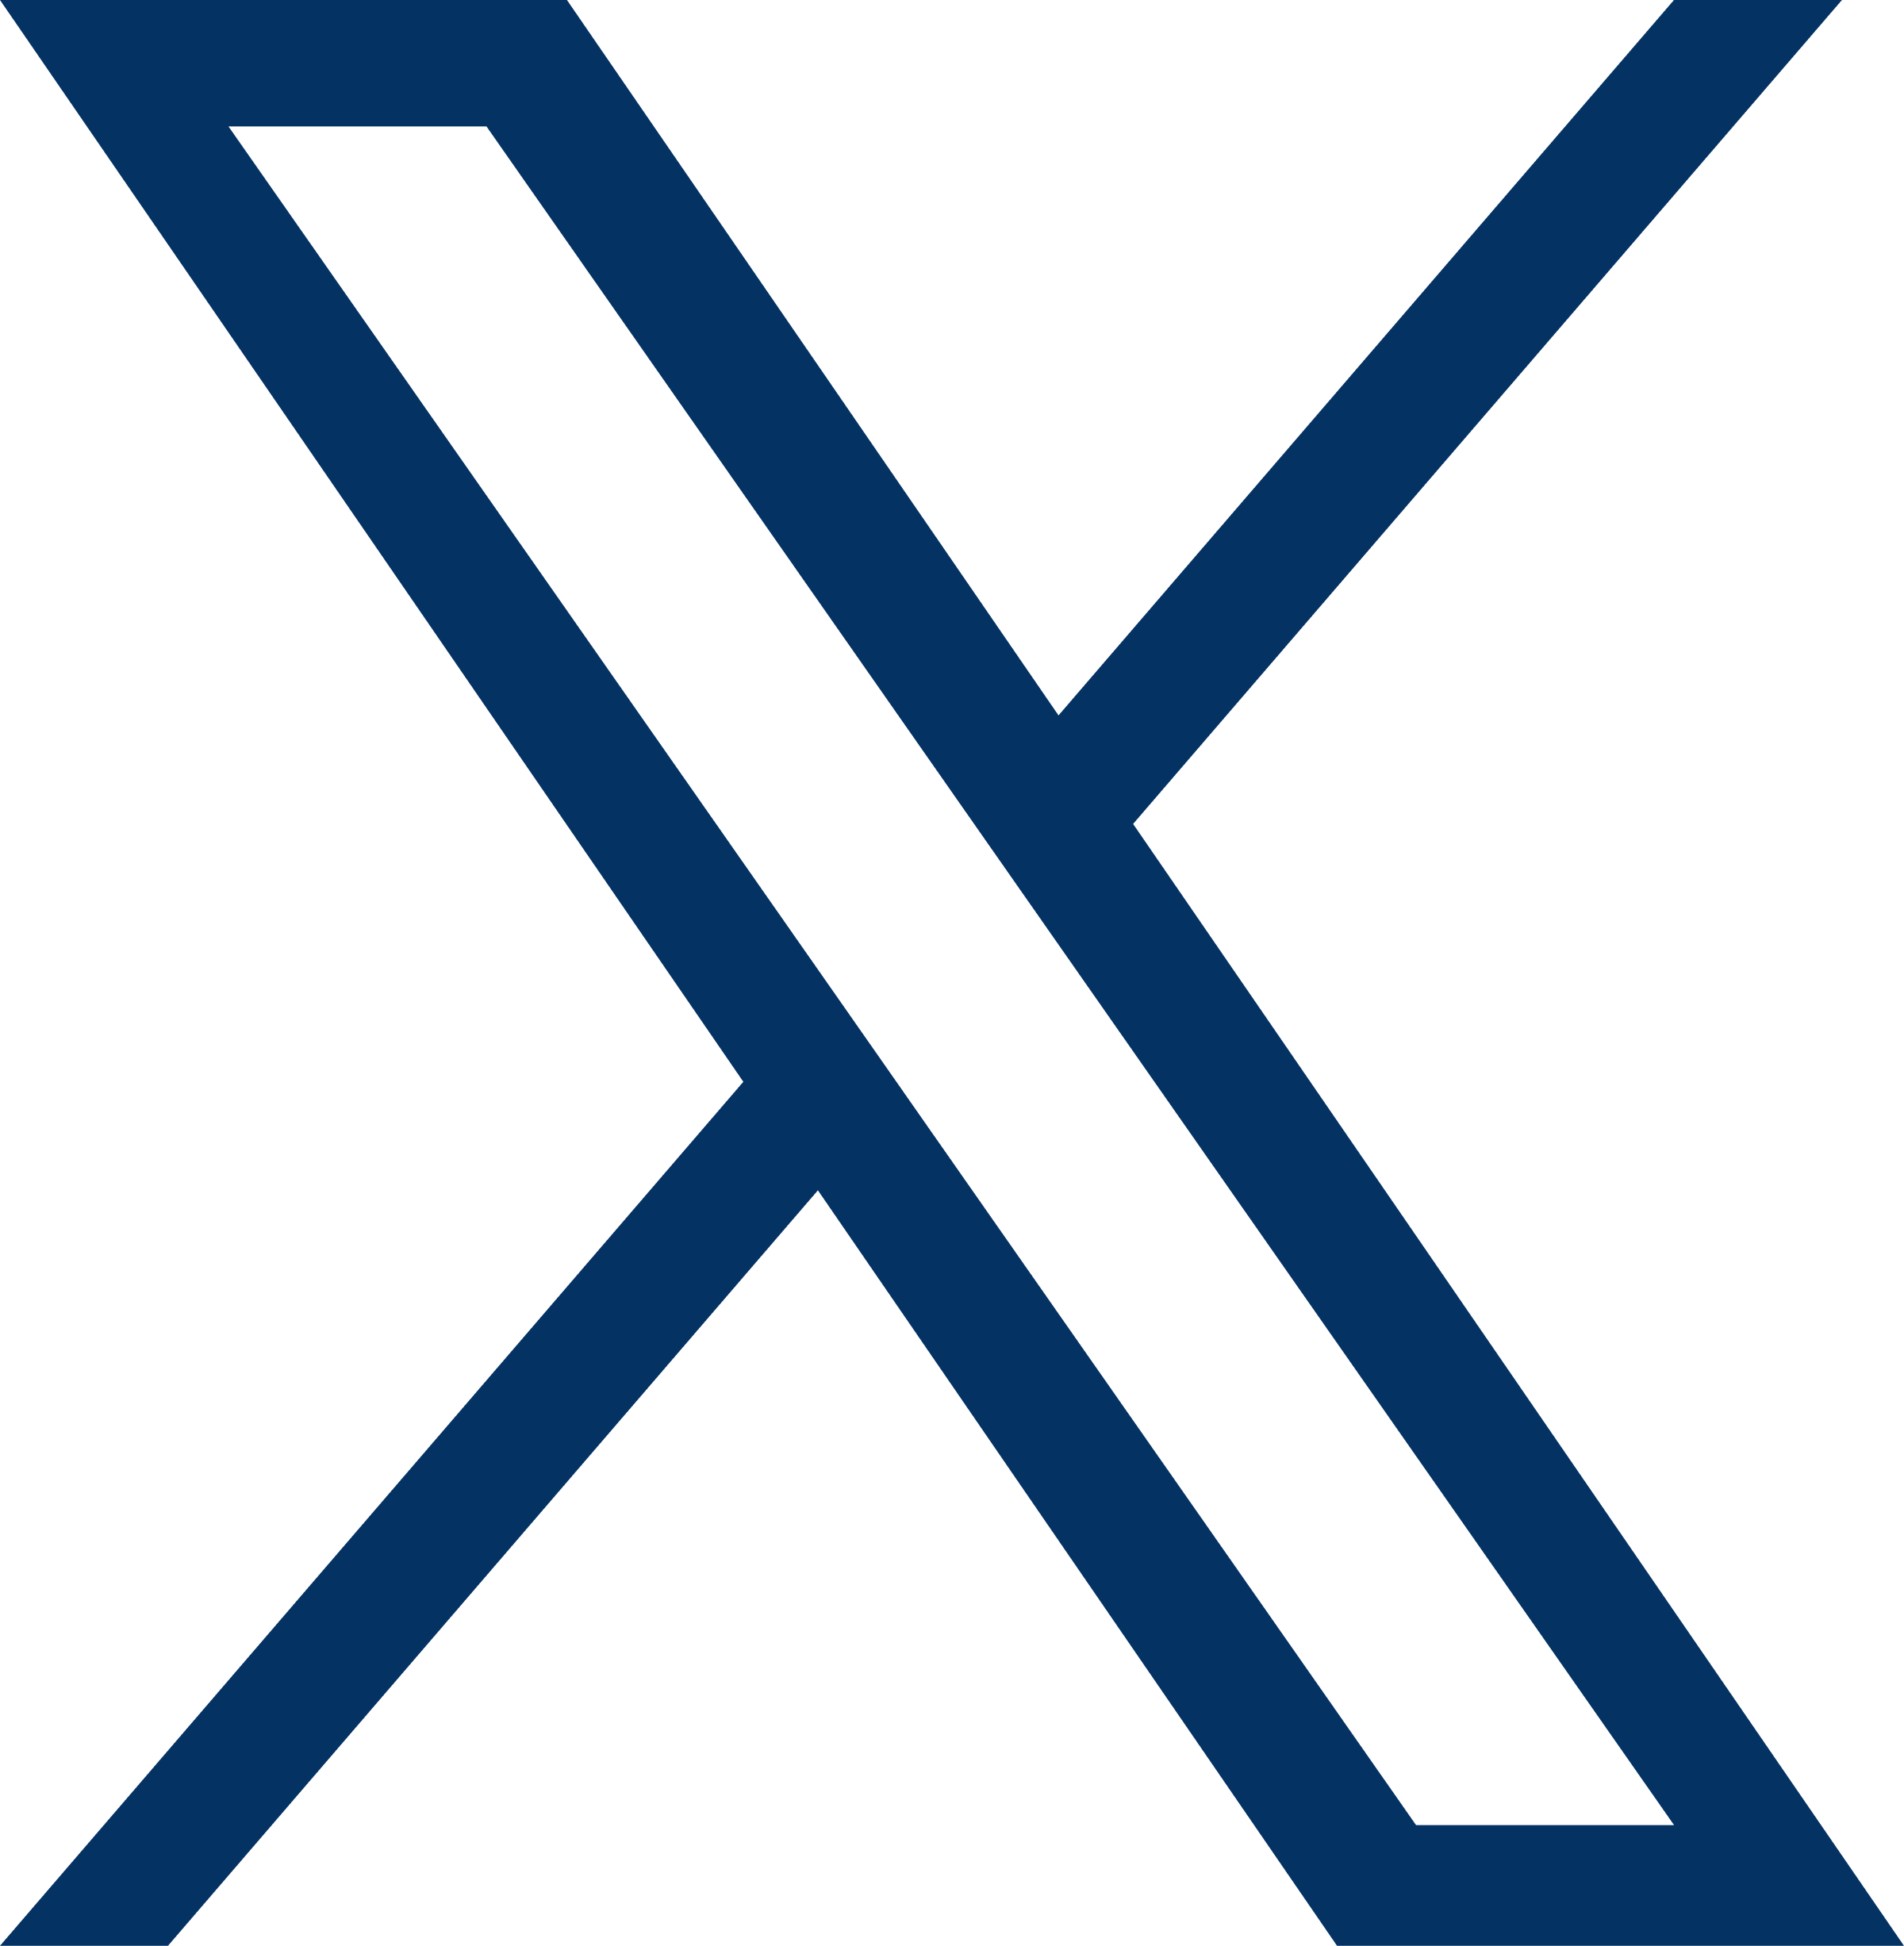 The logo for X